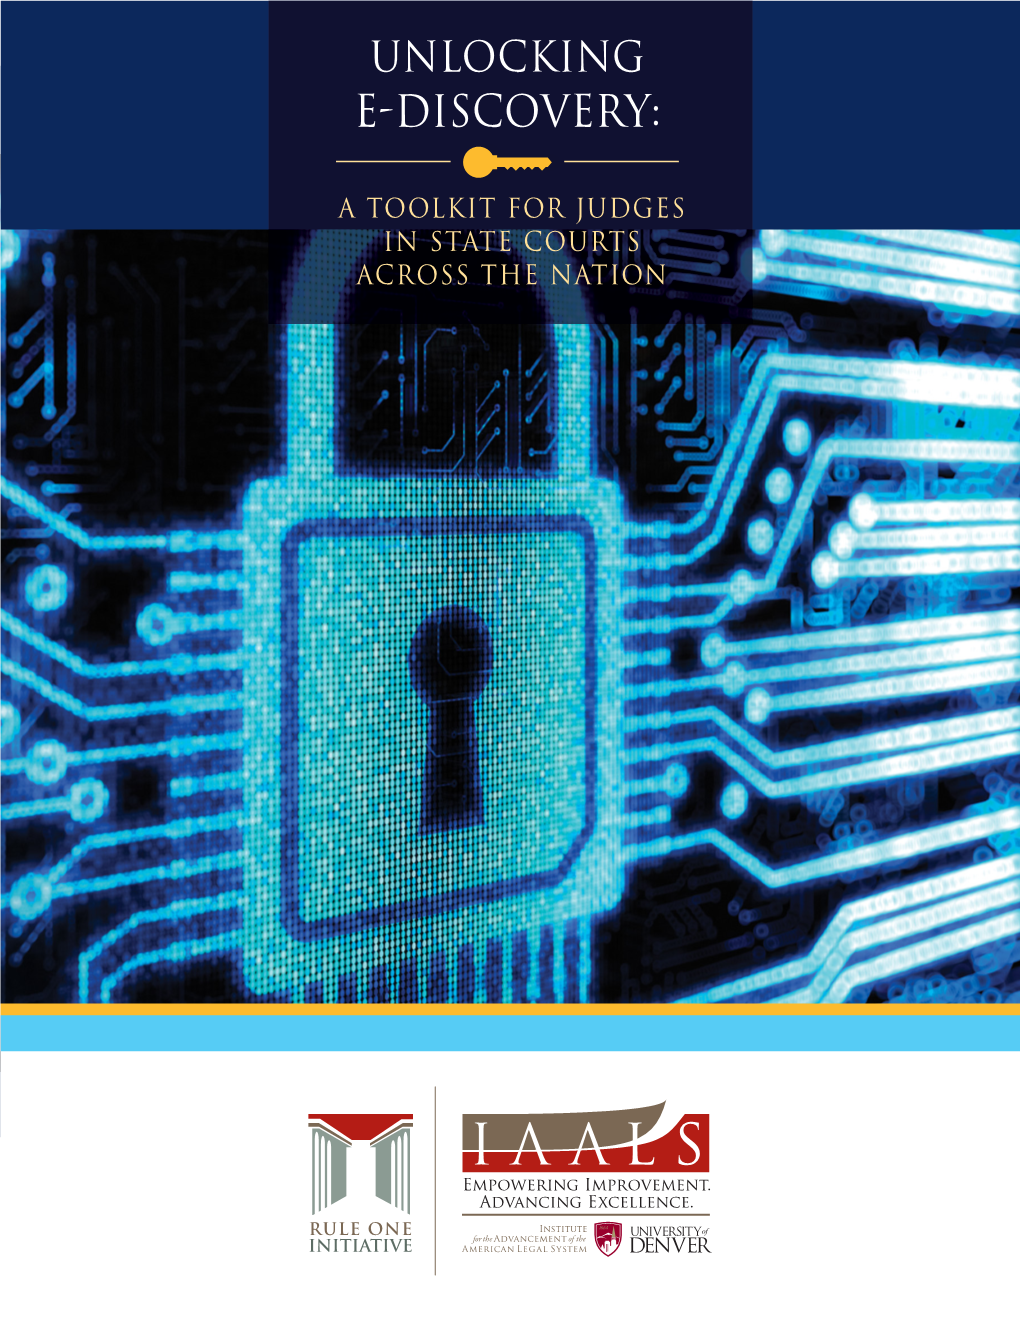 Unlocking E-Discovery: a Toolkit for Judges in State Courts